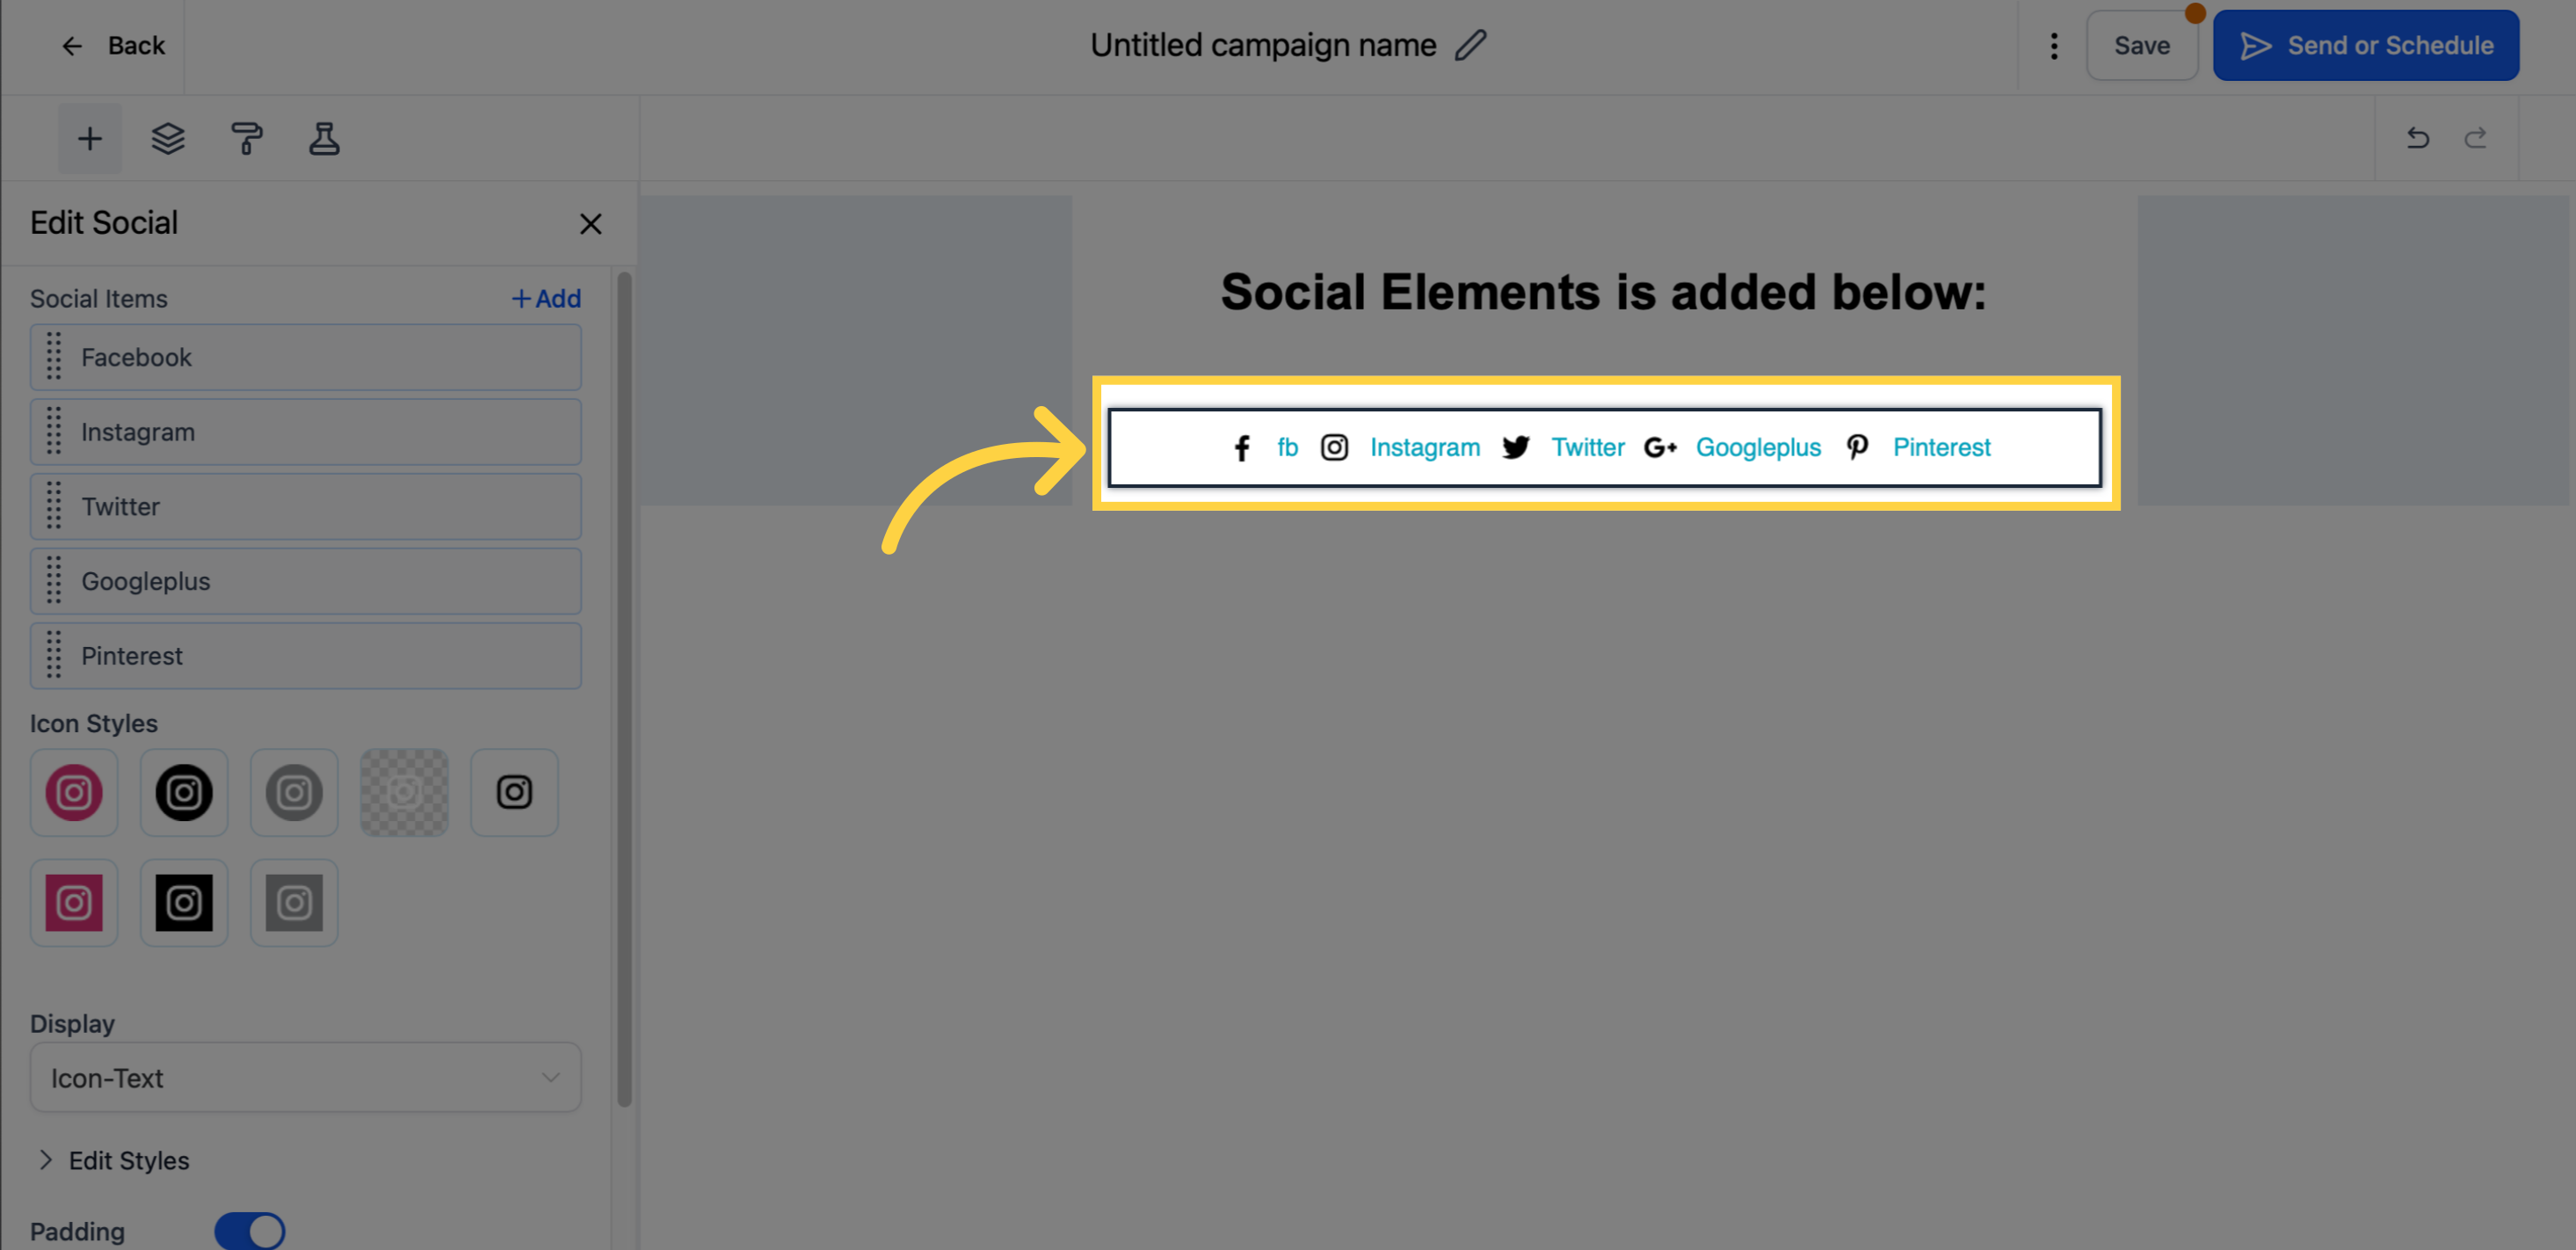 Sample output of edited social elements